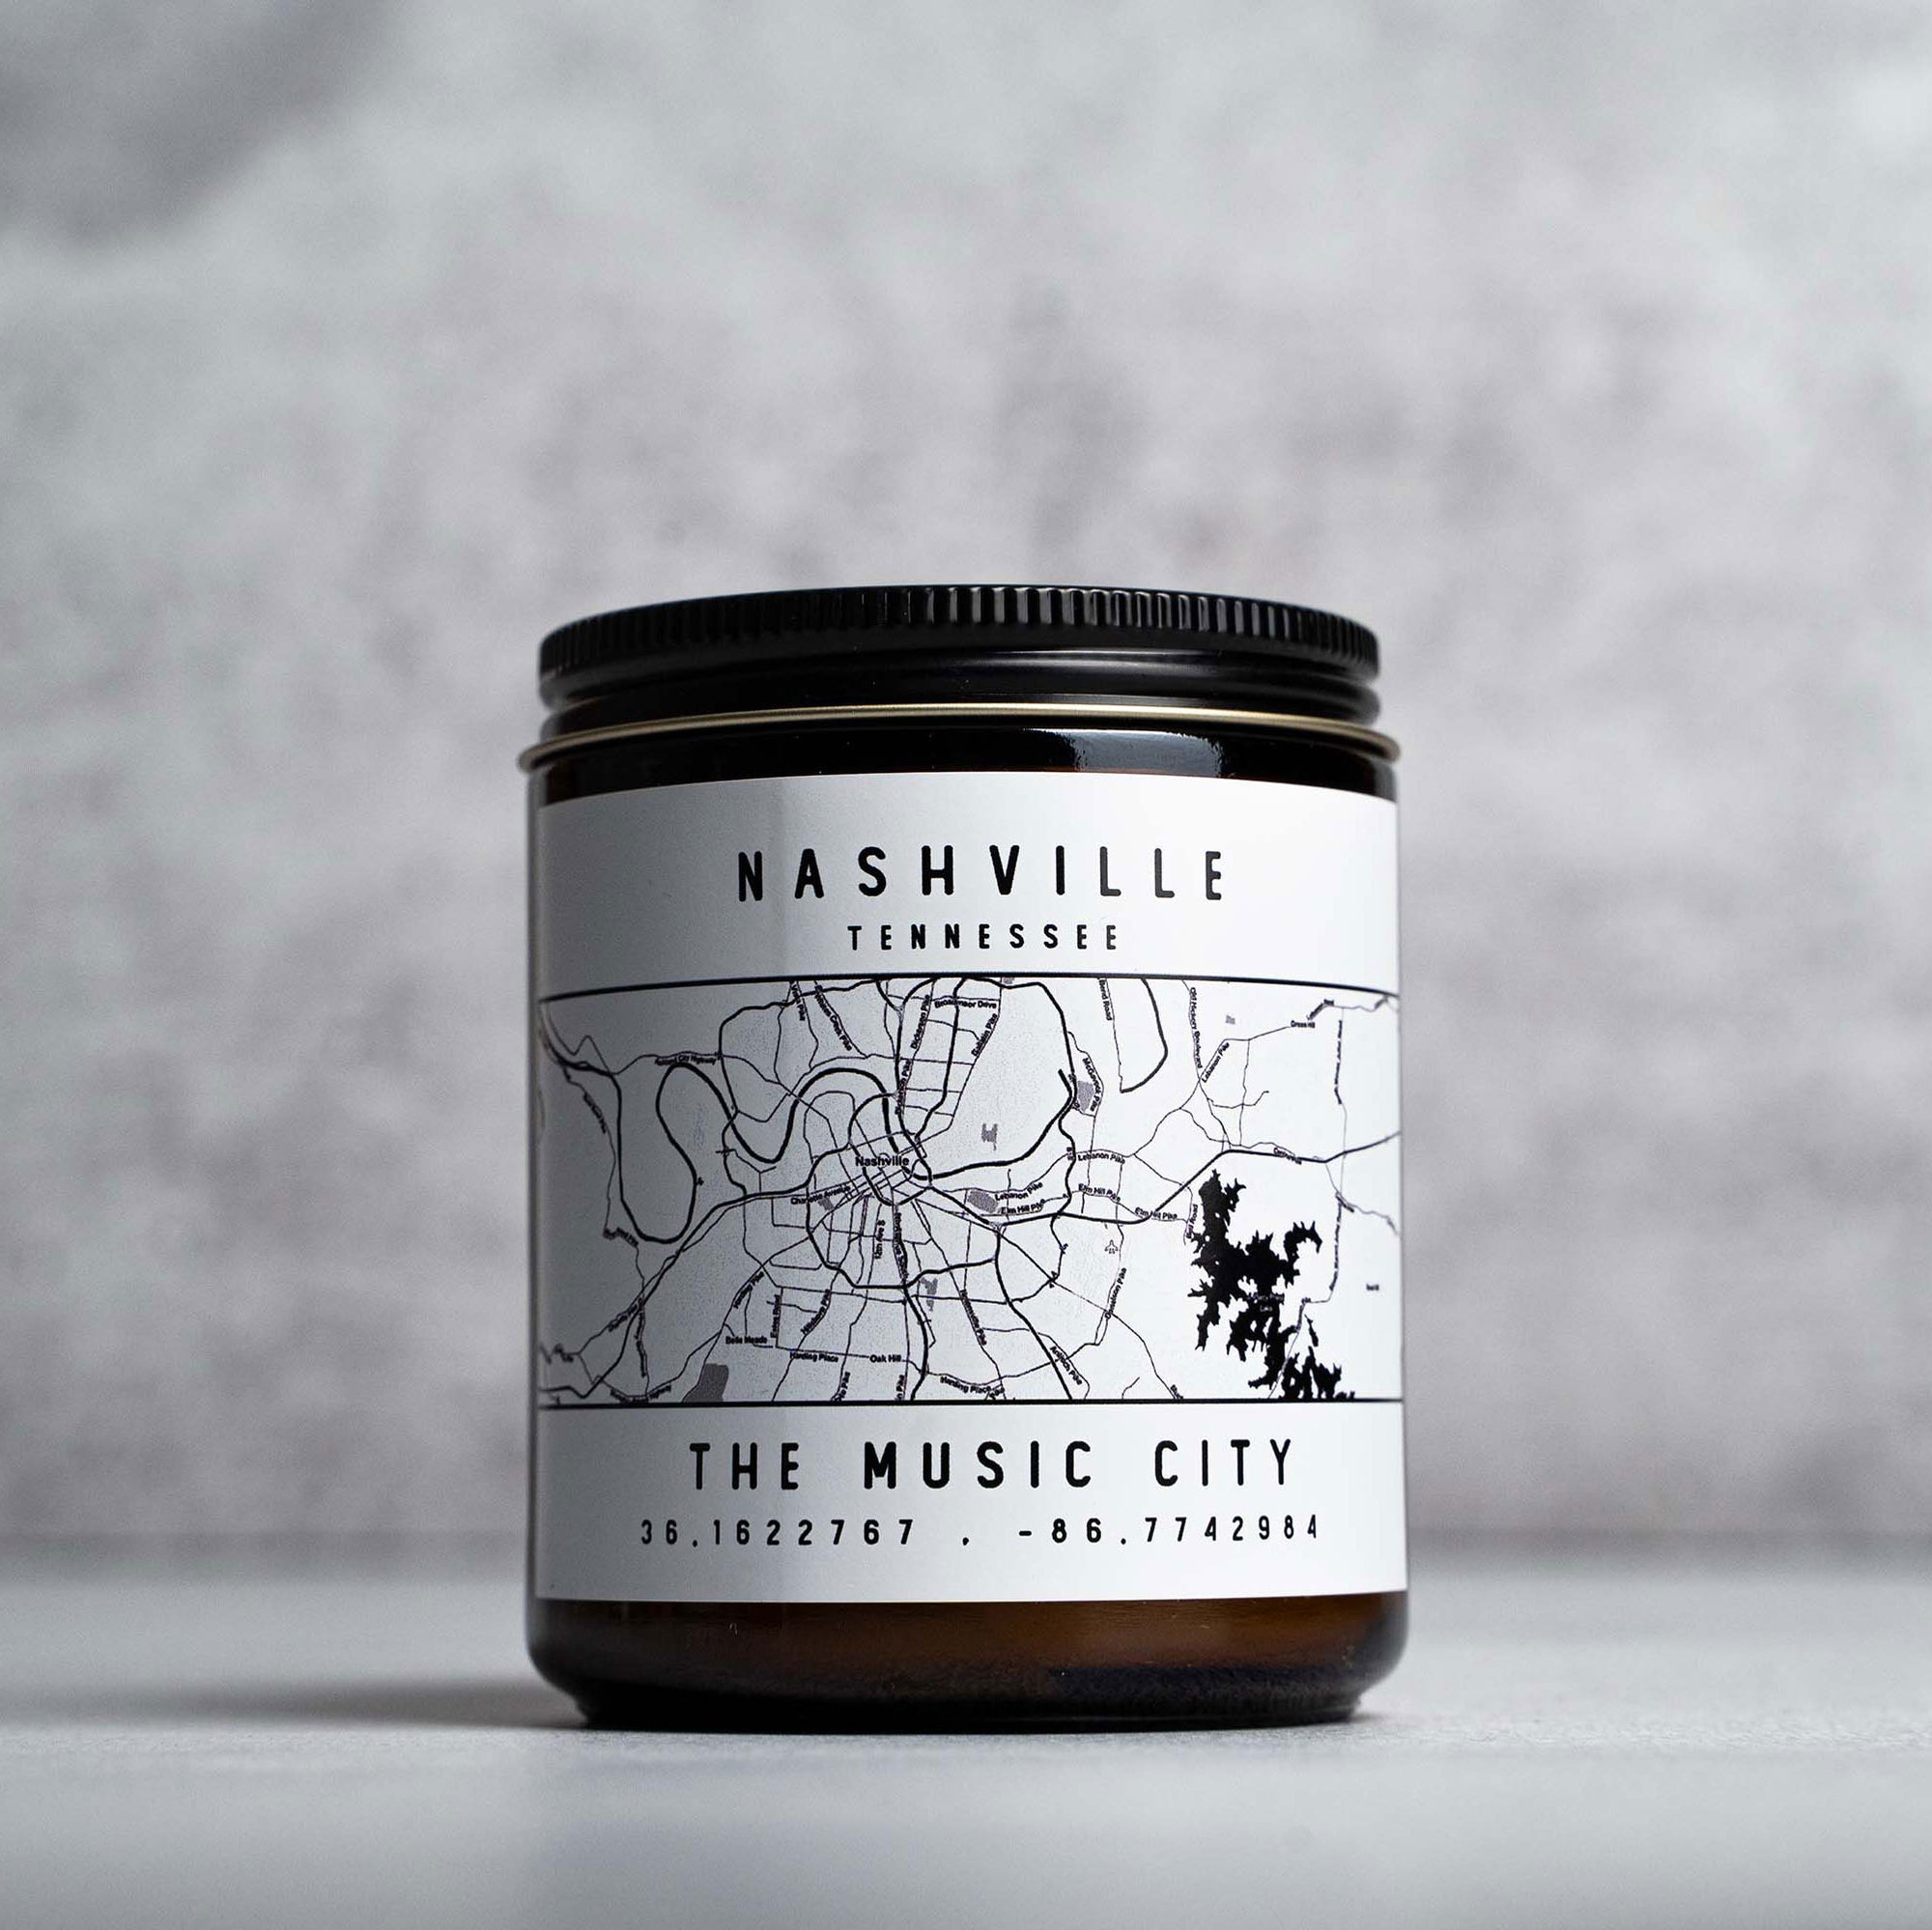 Candle in amber glass jar with Nashville, Tennessee The Music City map and coordinates